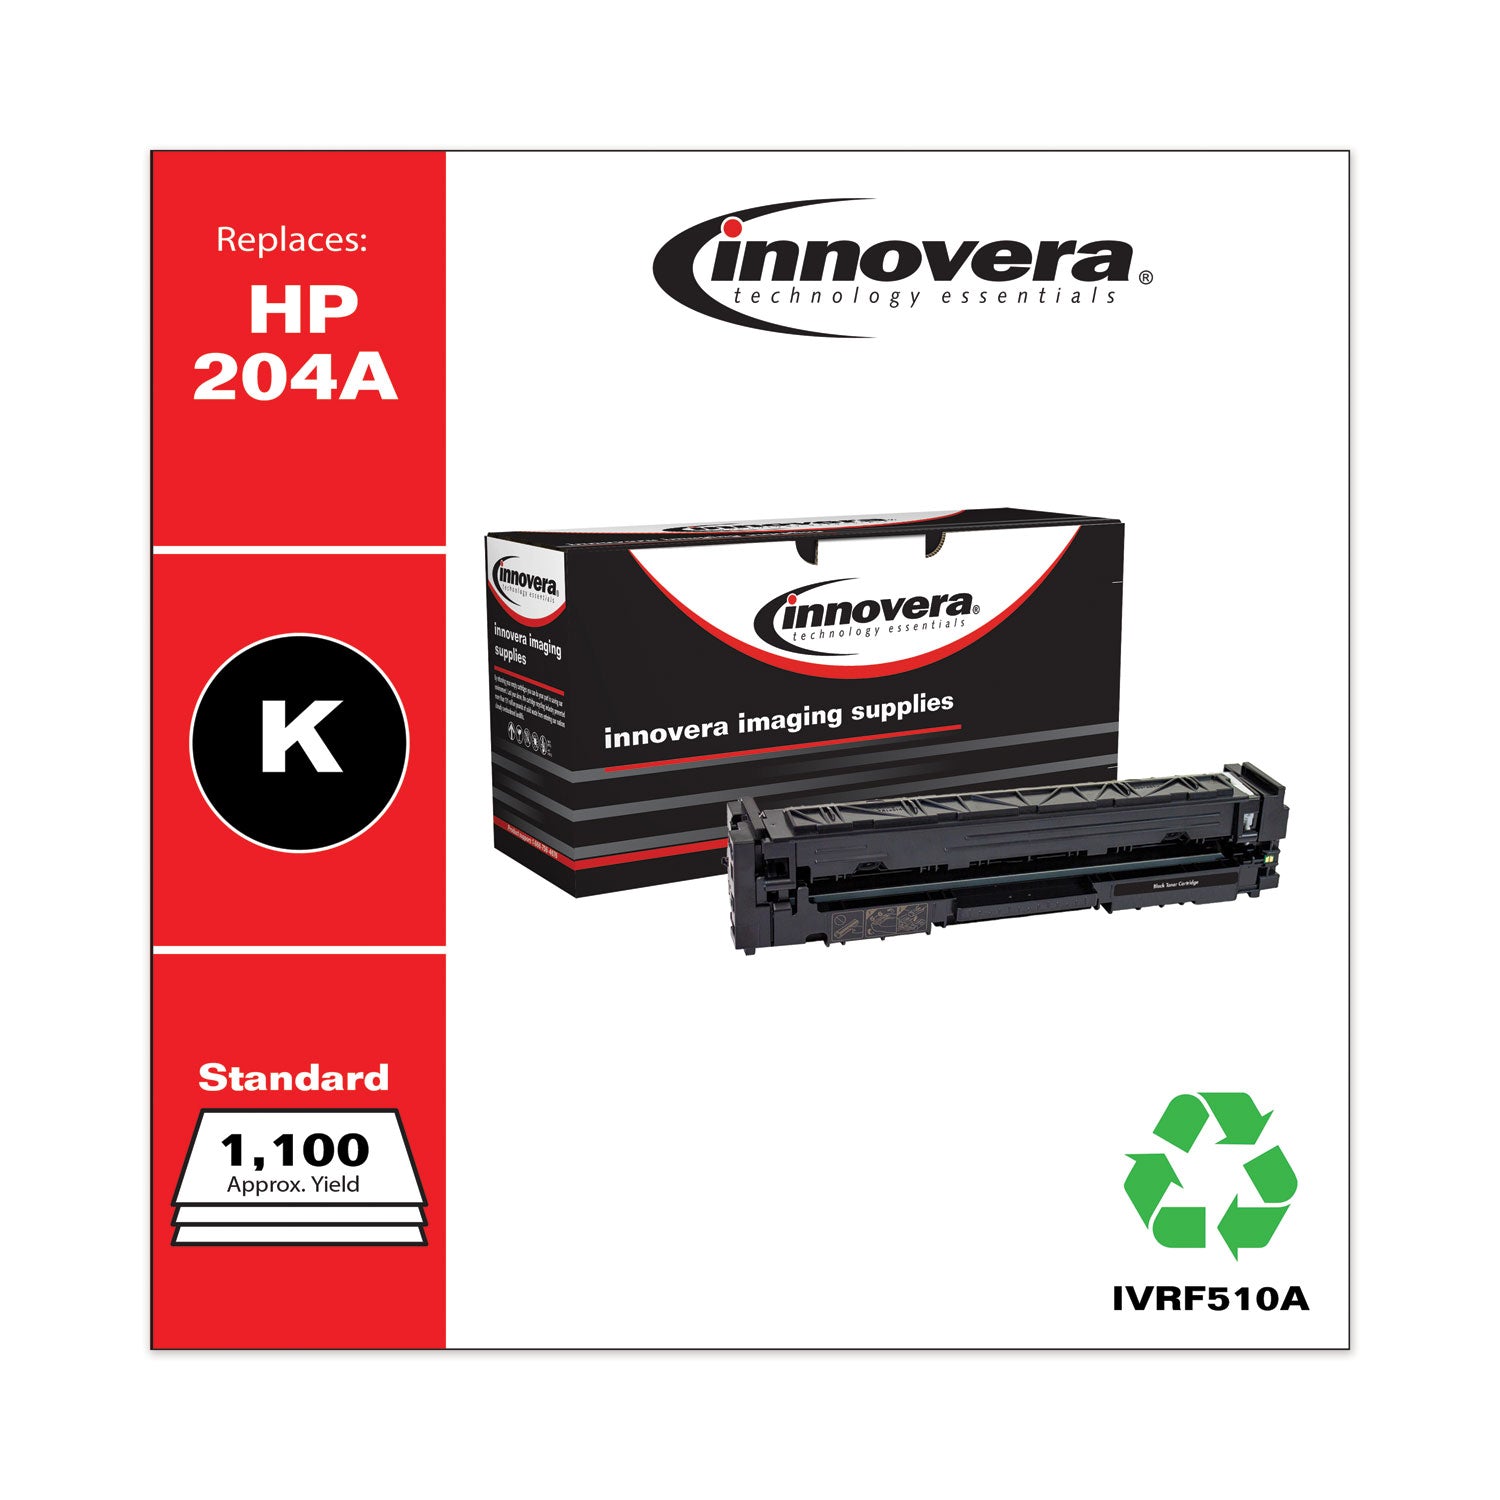 remanufactured-black-toner-replacement-for-204a-cf510a-1100-page-yield_ivrf510a - 2